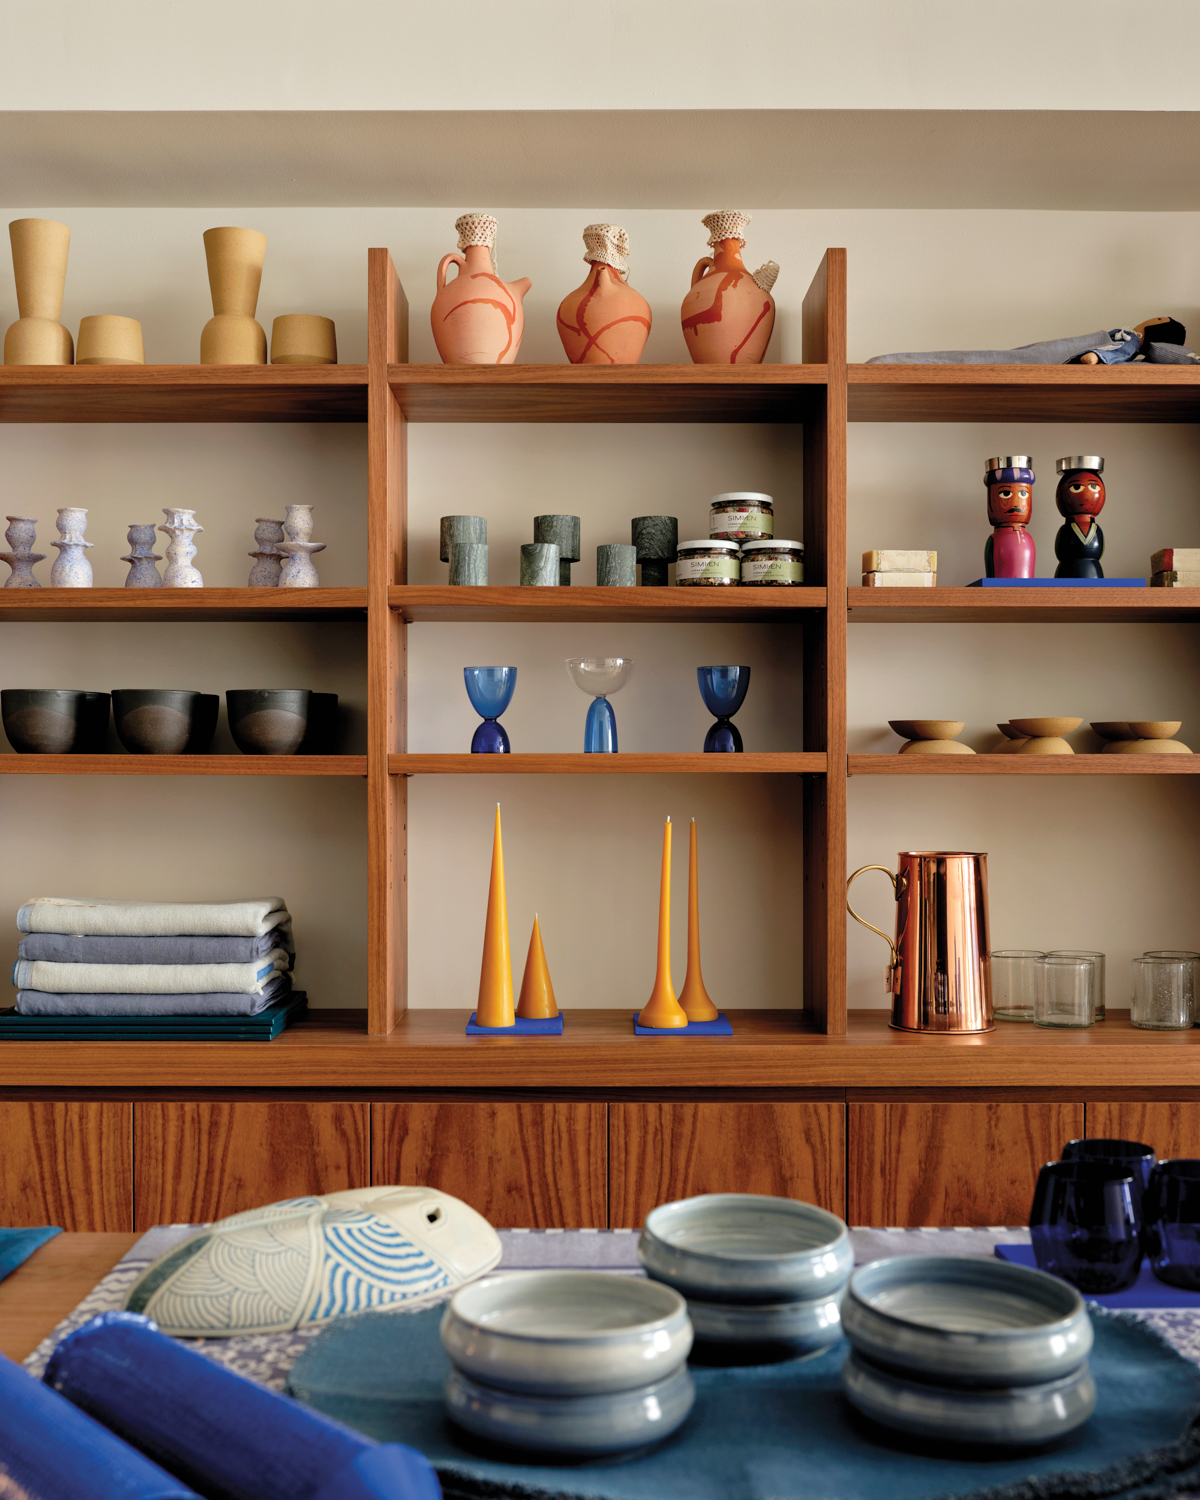 Vases and home decor items on display on shelving at Komal Kehar's Common Things shop